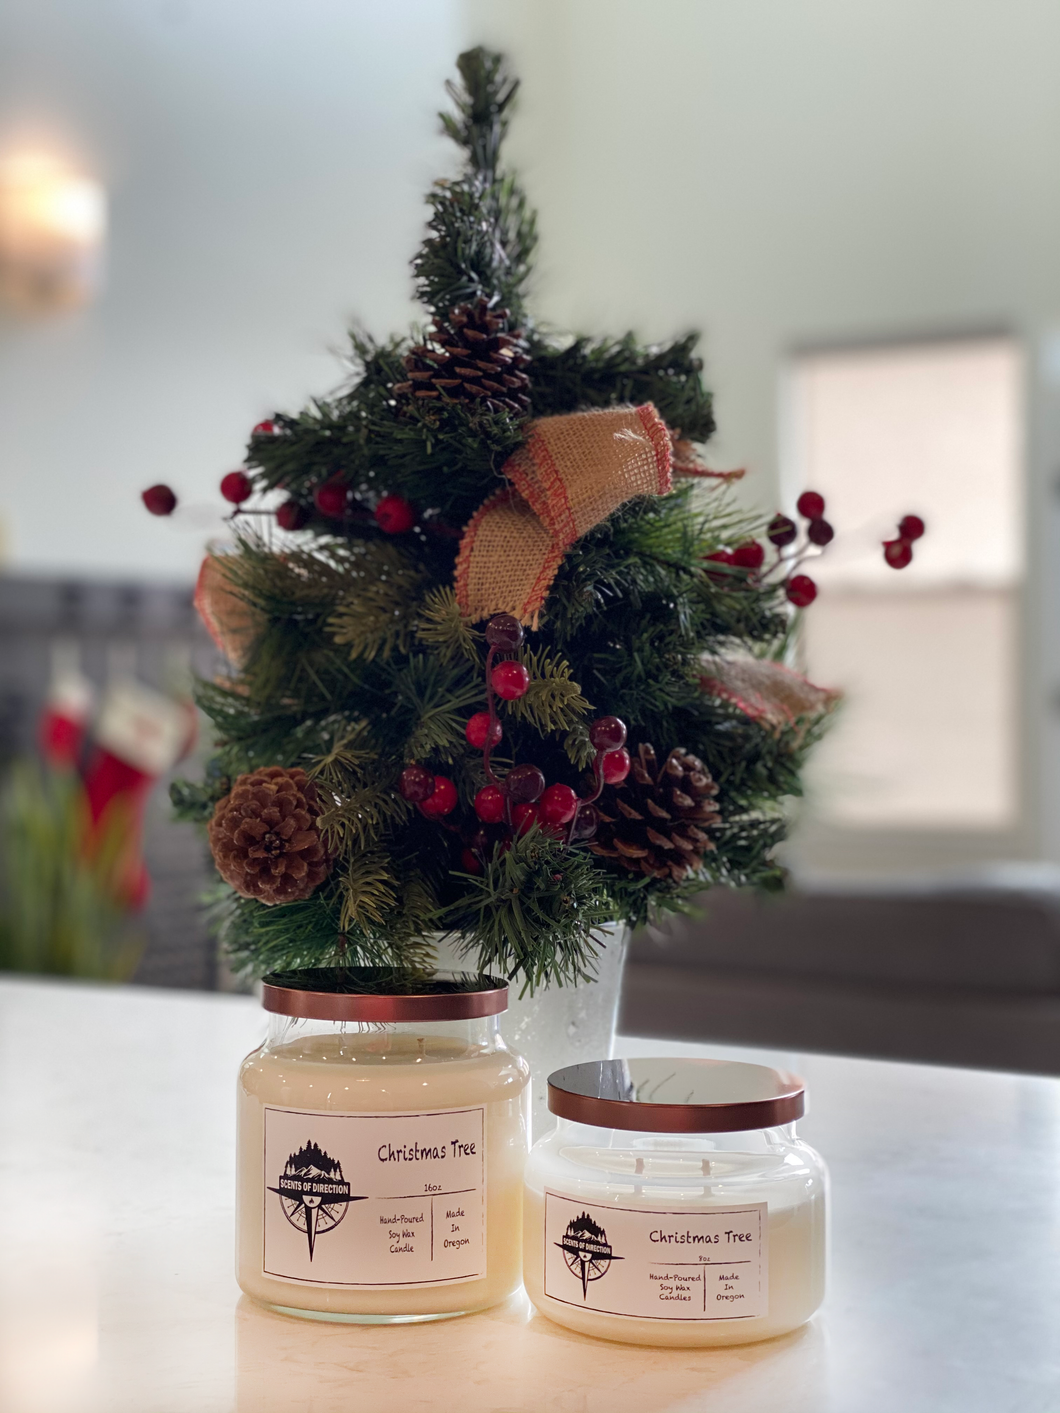 Christmas Tree - Soy Candle